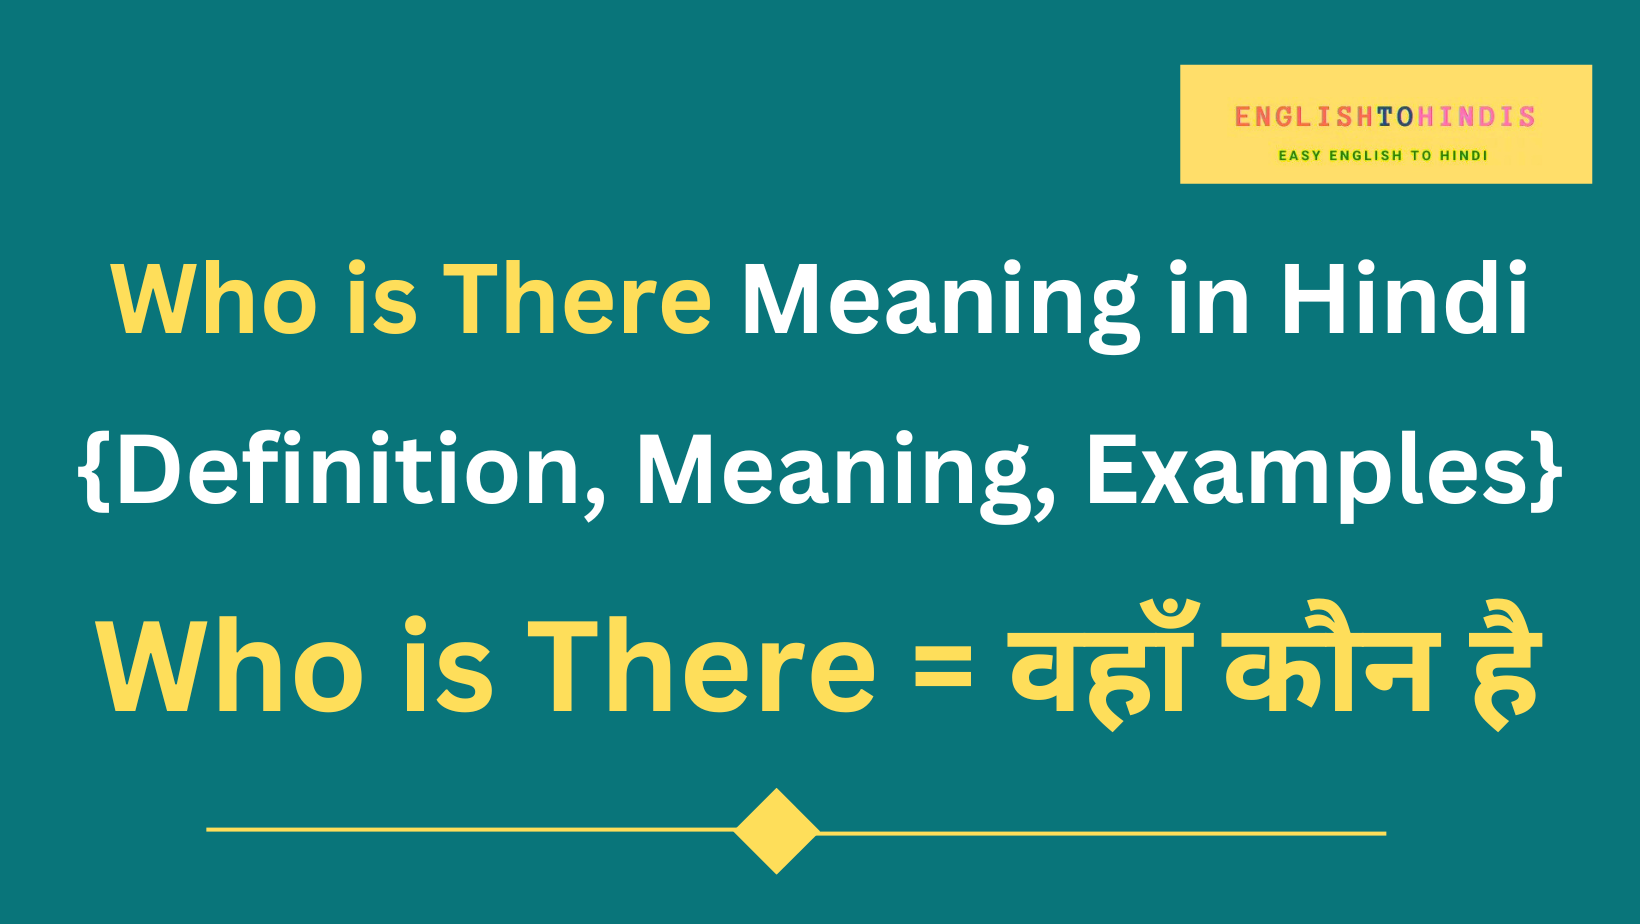 Who is There Meaning in Hindi